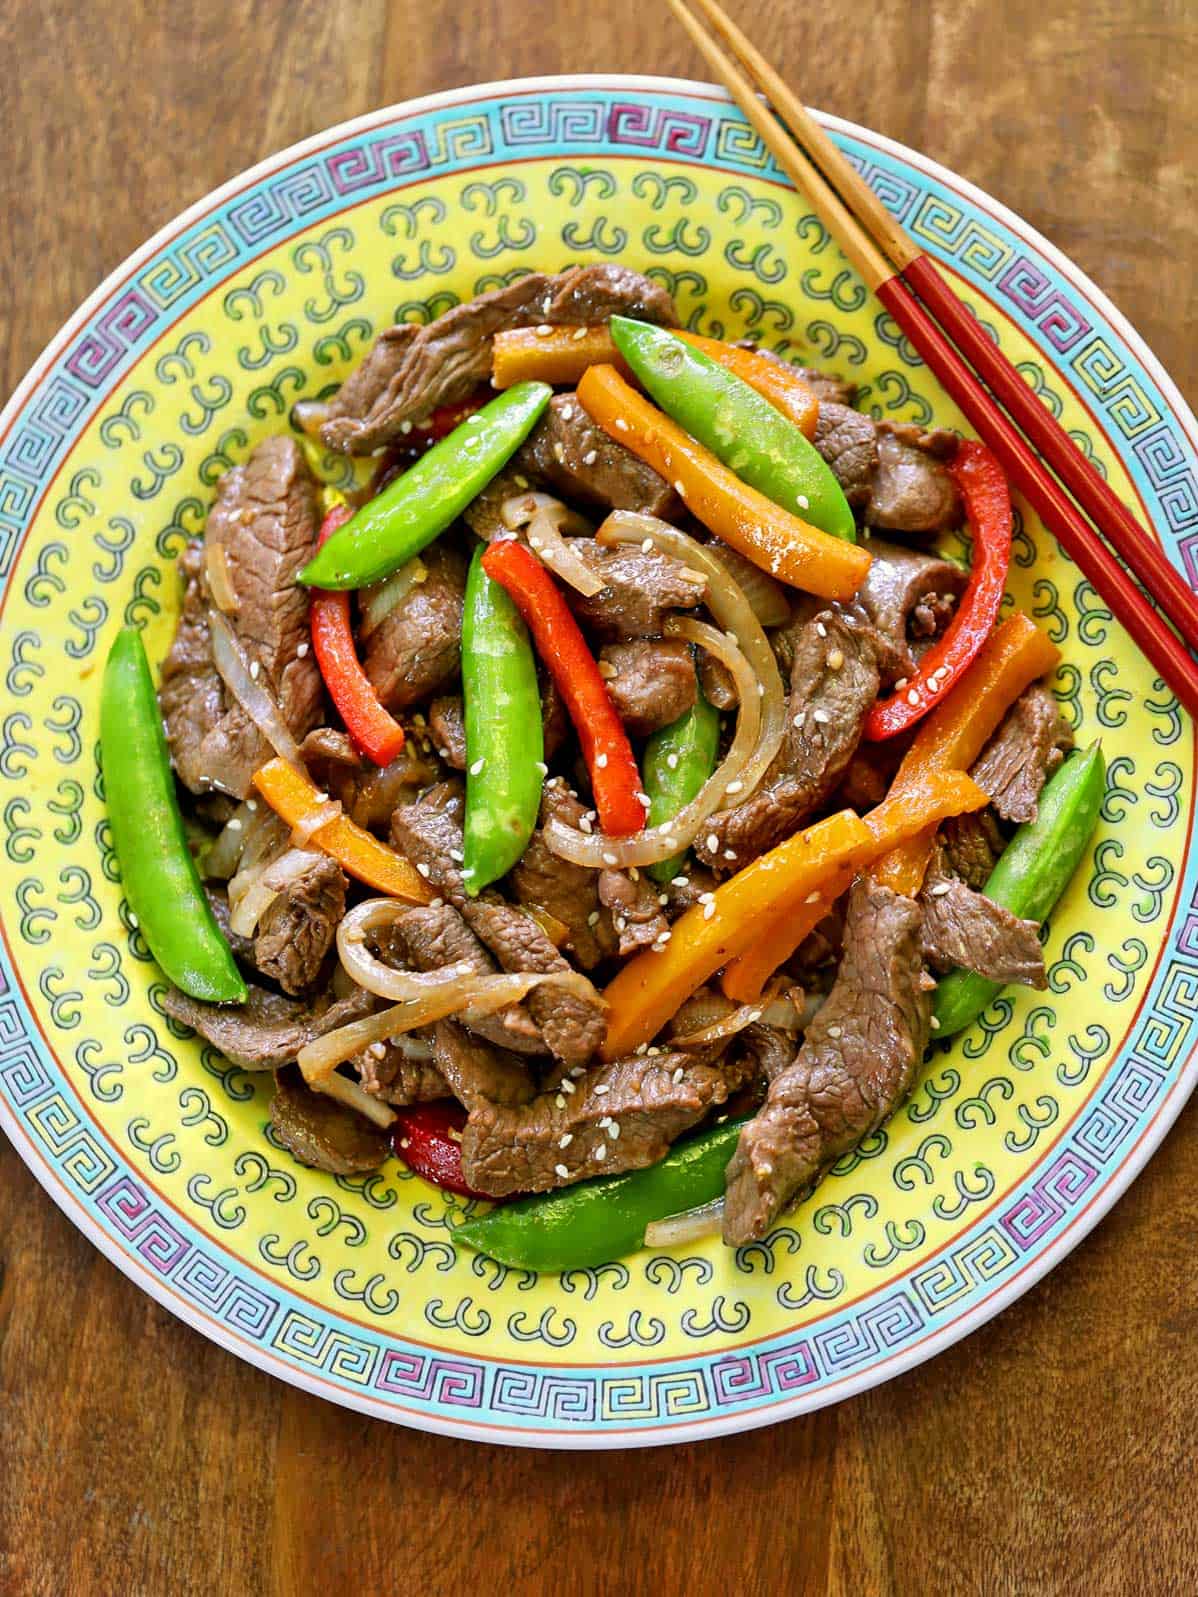 A beef stir-fry is served on a Chinese plate with chopsticks.